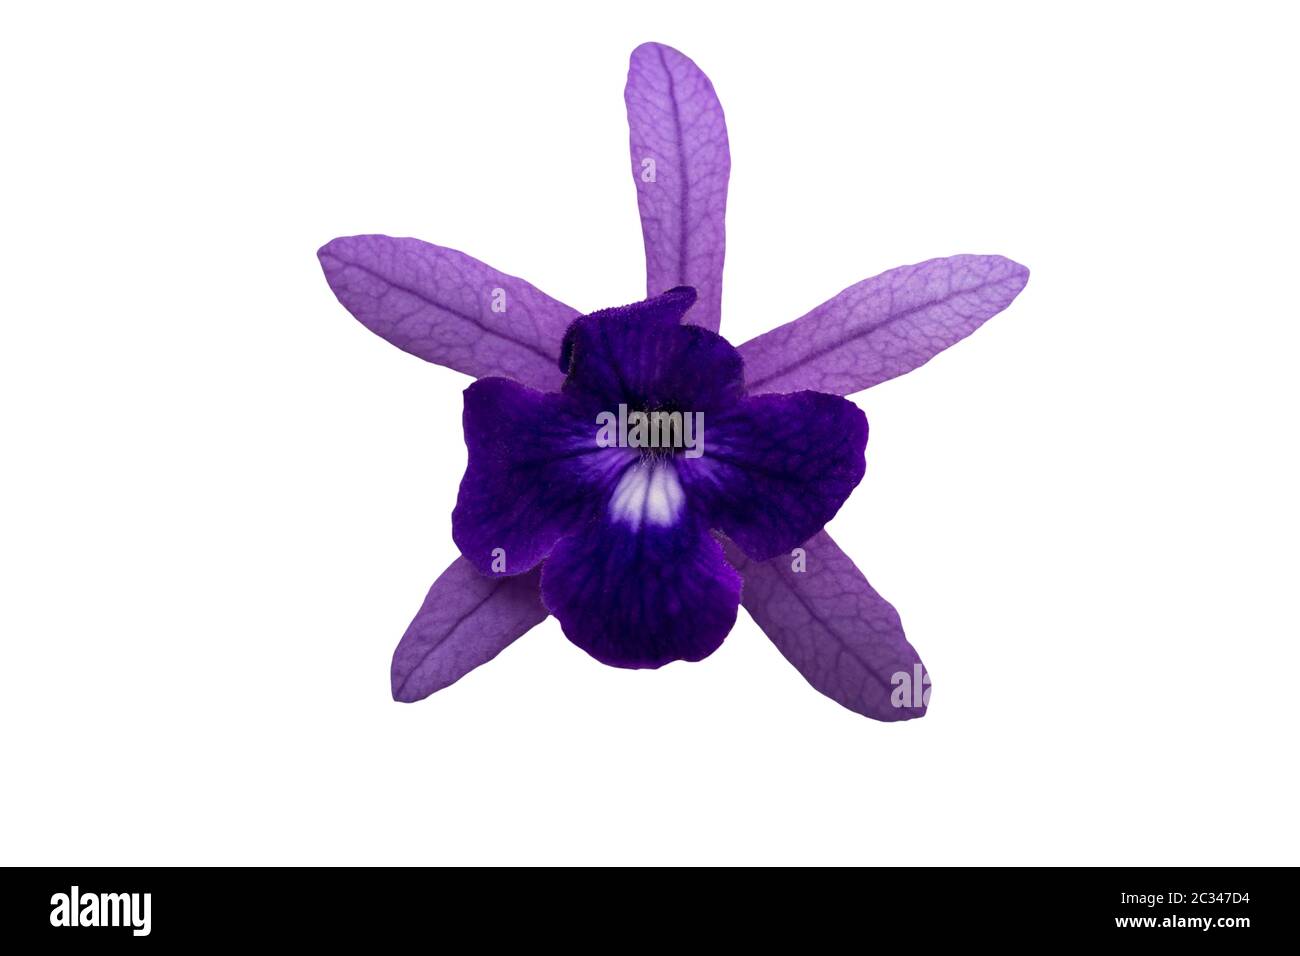 Sandpaper vine , Petrea volubilis,purple flower isolated on white background.Saved with clipping path. Stock Photo